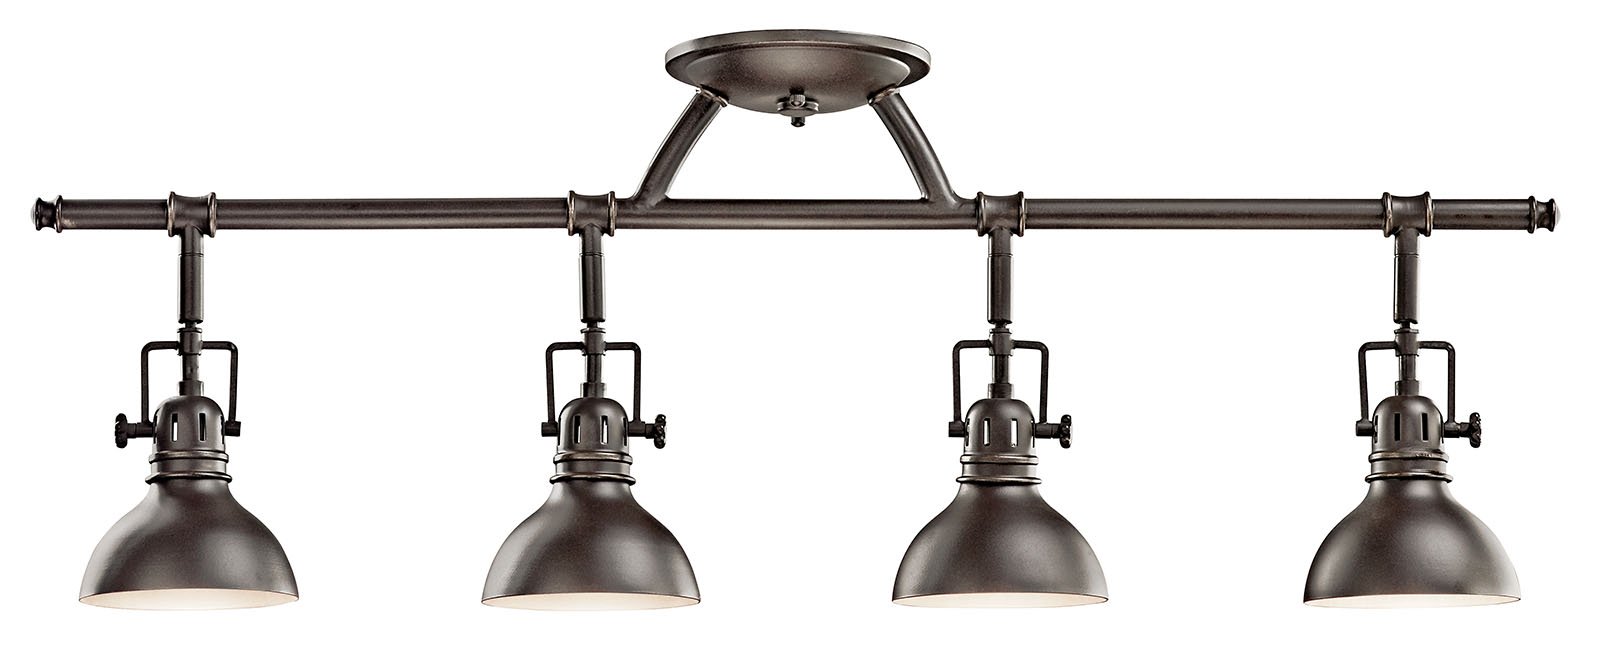 Constructed from steel, this refined 4 light fixed rail fixture features an Olde Bronze finish to subtly enhance any space.